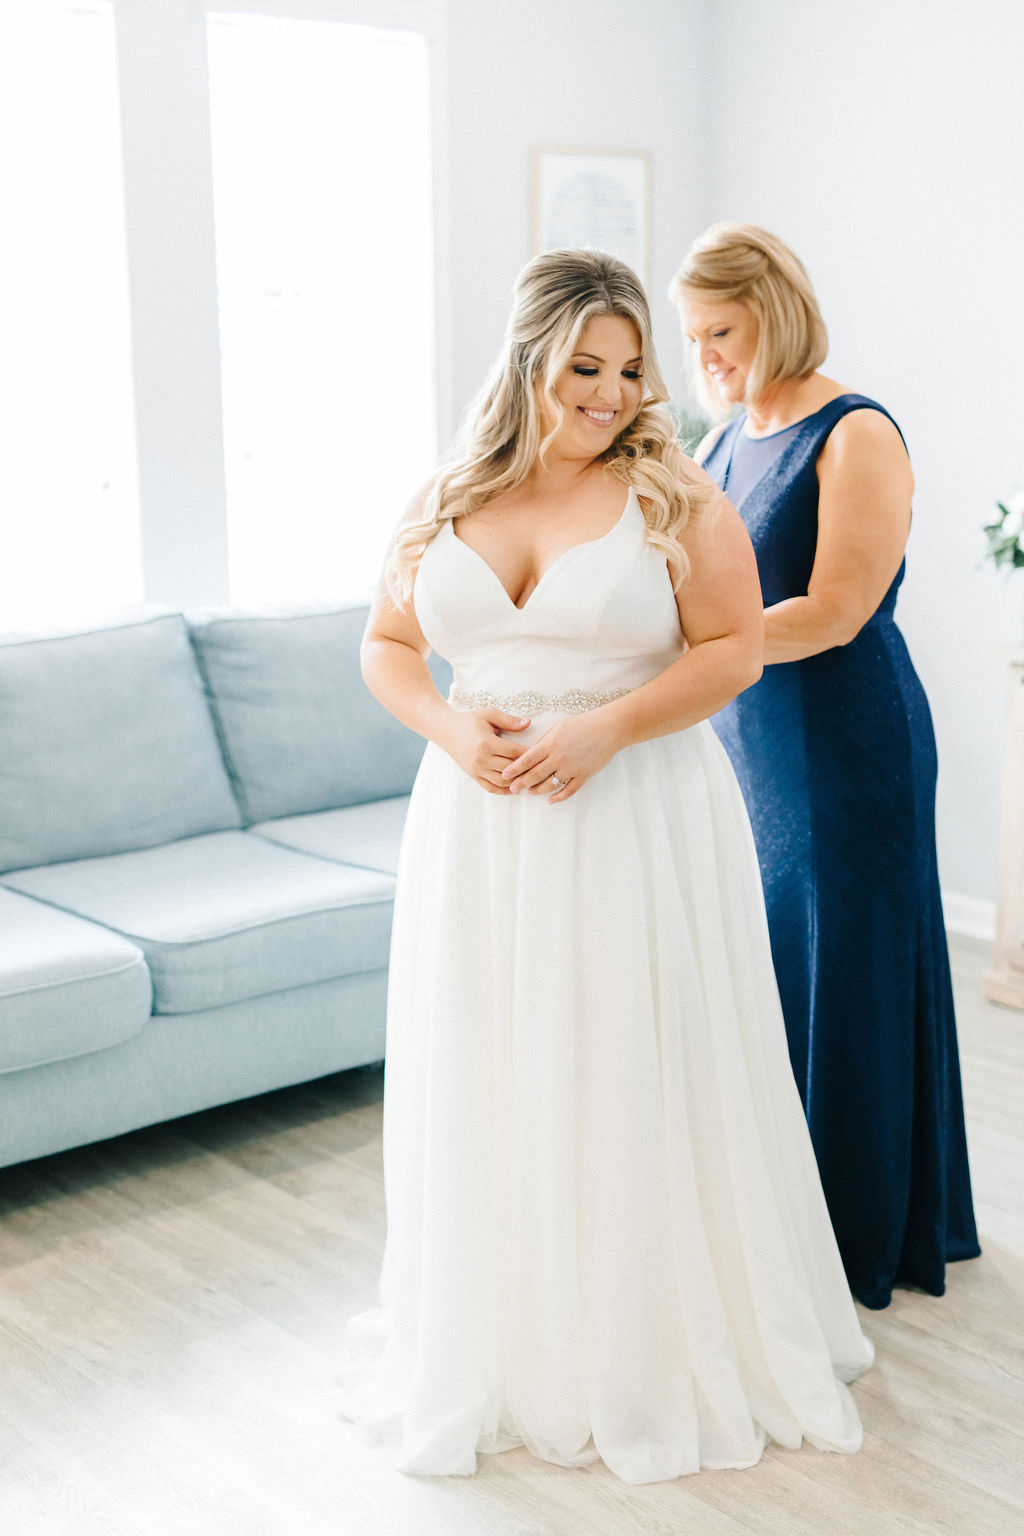 Tampa Bay Bride and Mother Getting Wedding Ready Photo, Bride in Simple White A Line Wedding Dress, Mother of Bride in Floor Length Navy Sleeveless Dress, Jana Stall